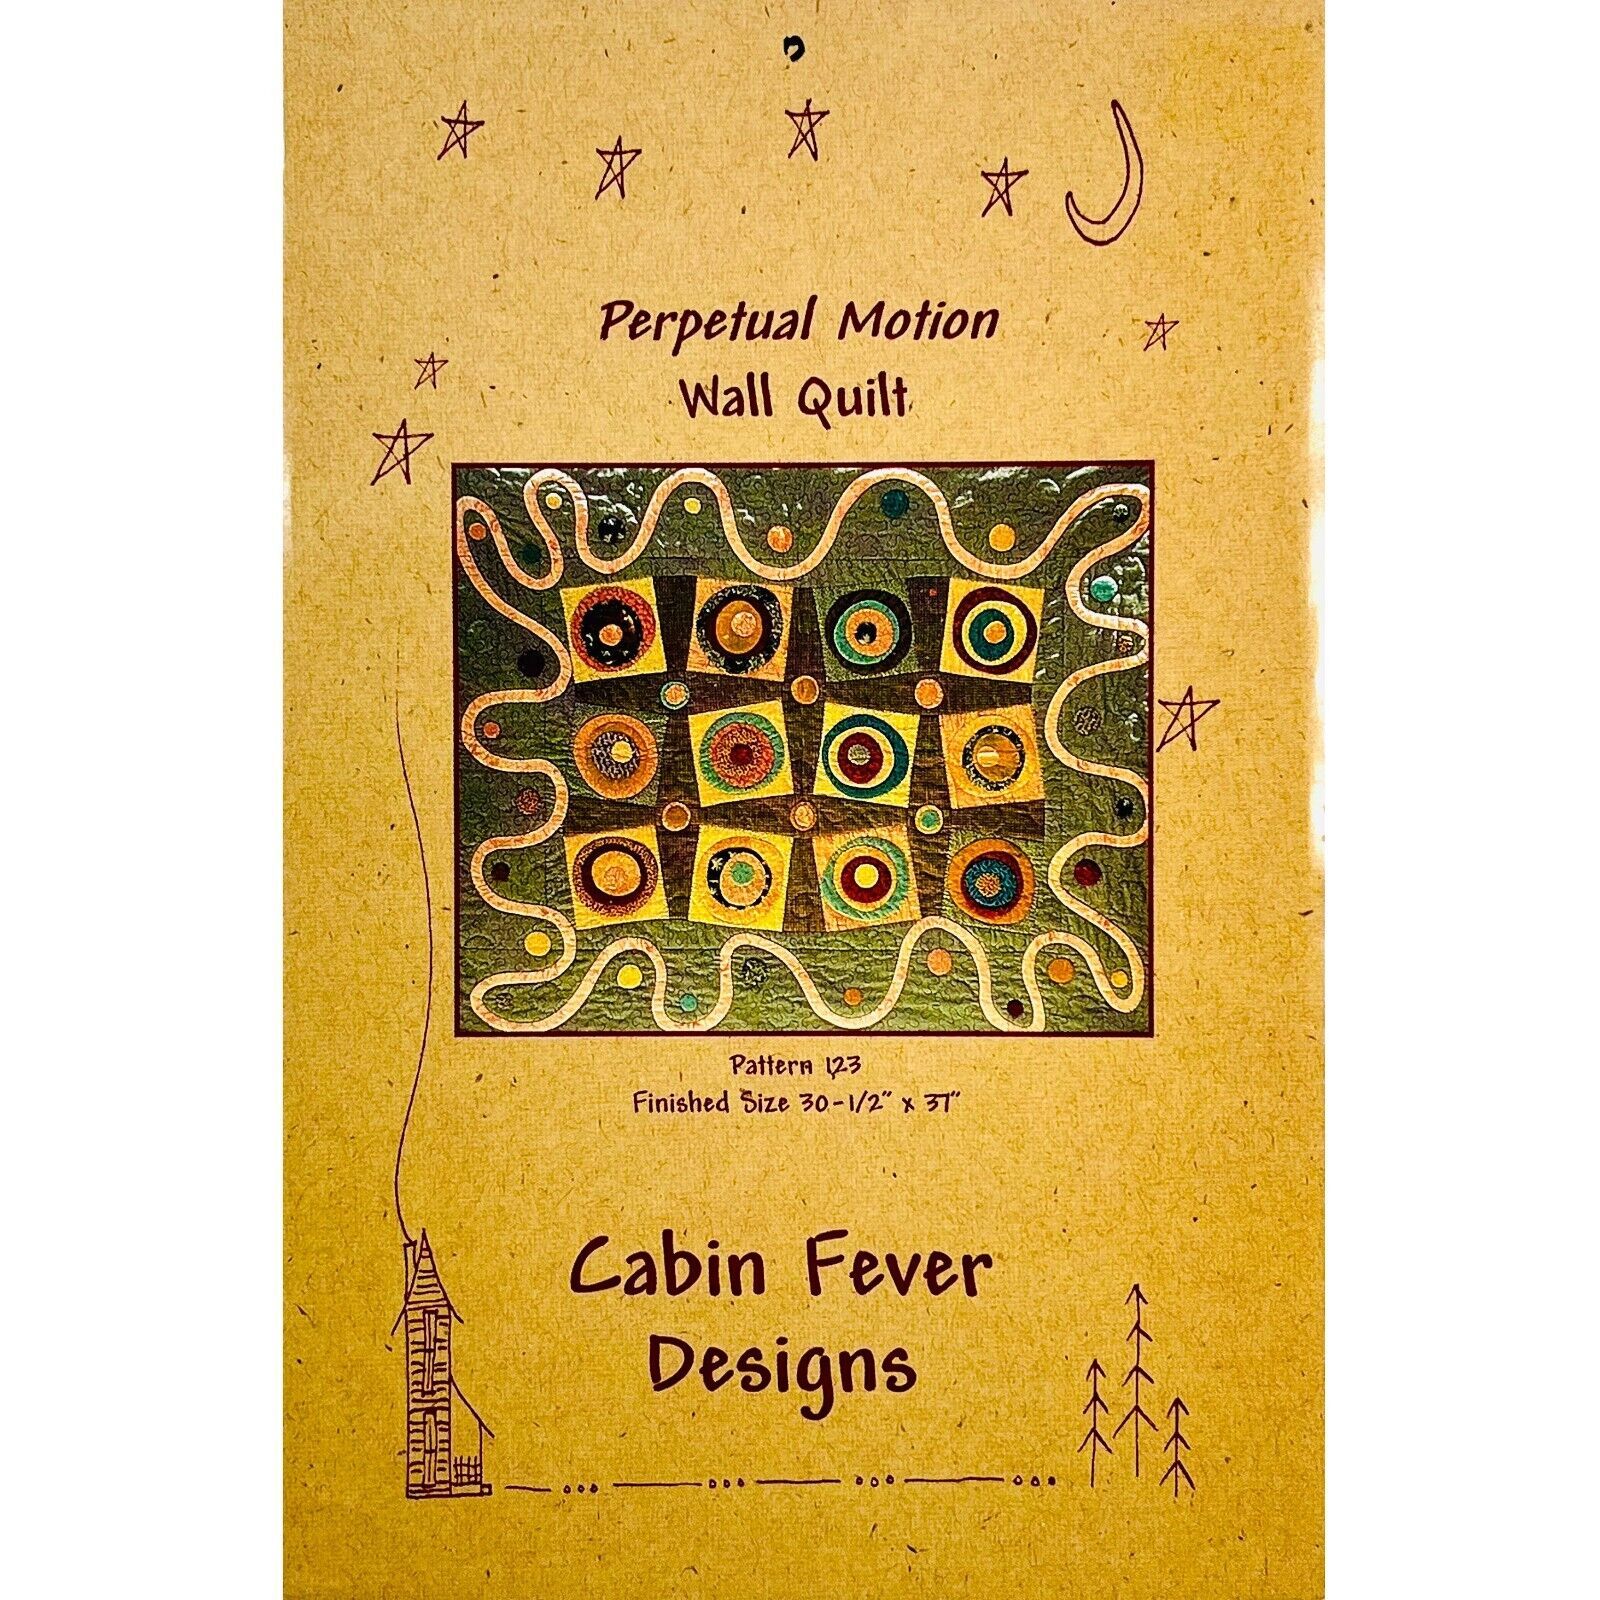 Perpetual Motion Modern Abstract Wall Quilt PATTERN 123 by Cabin Fever Designs - $8.99